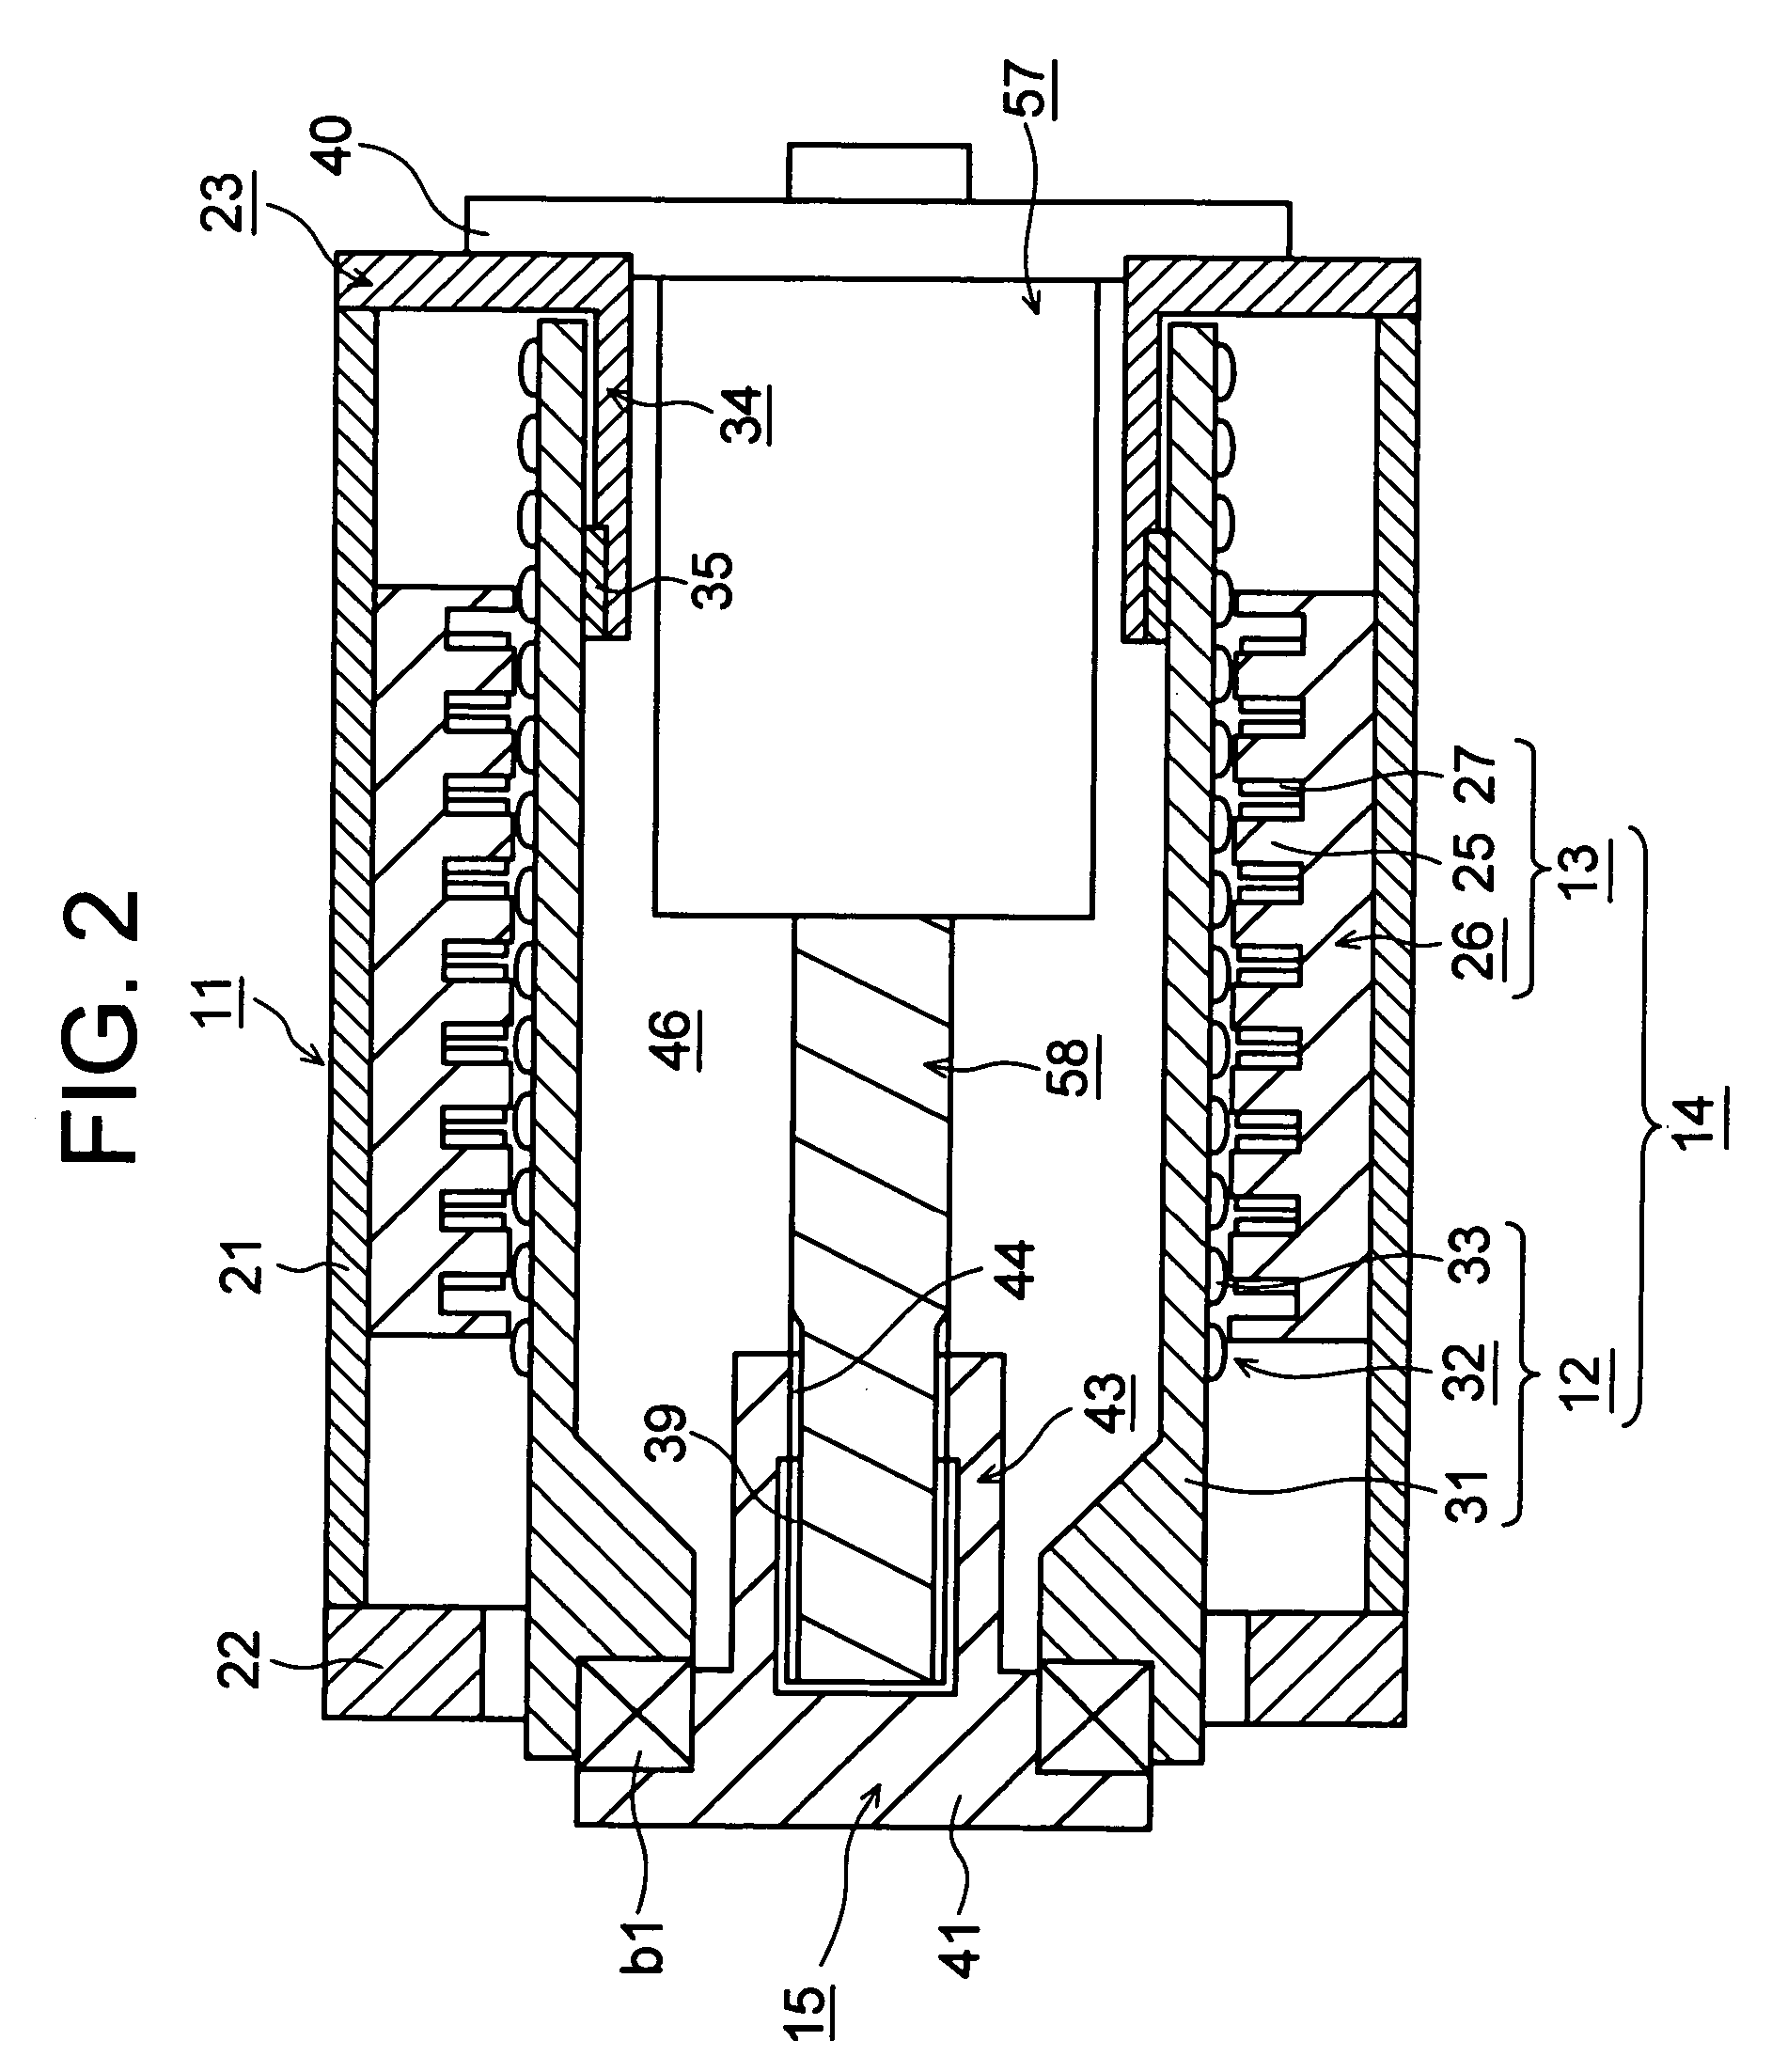 Drive apparatus for injection molding machine, injection apparatus, and mold clamping apparatus